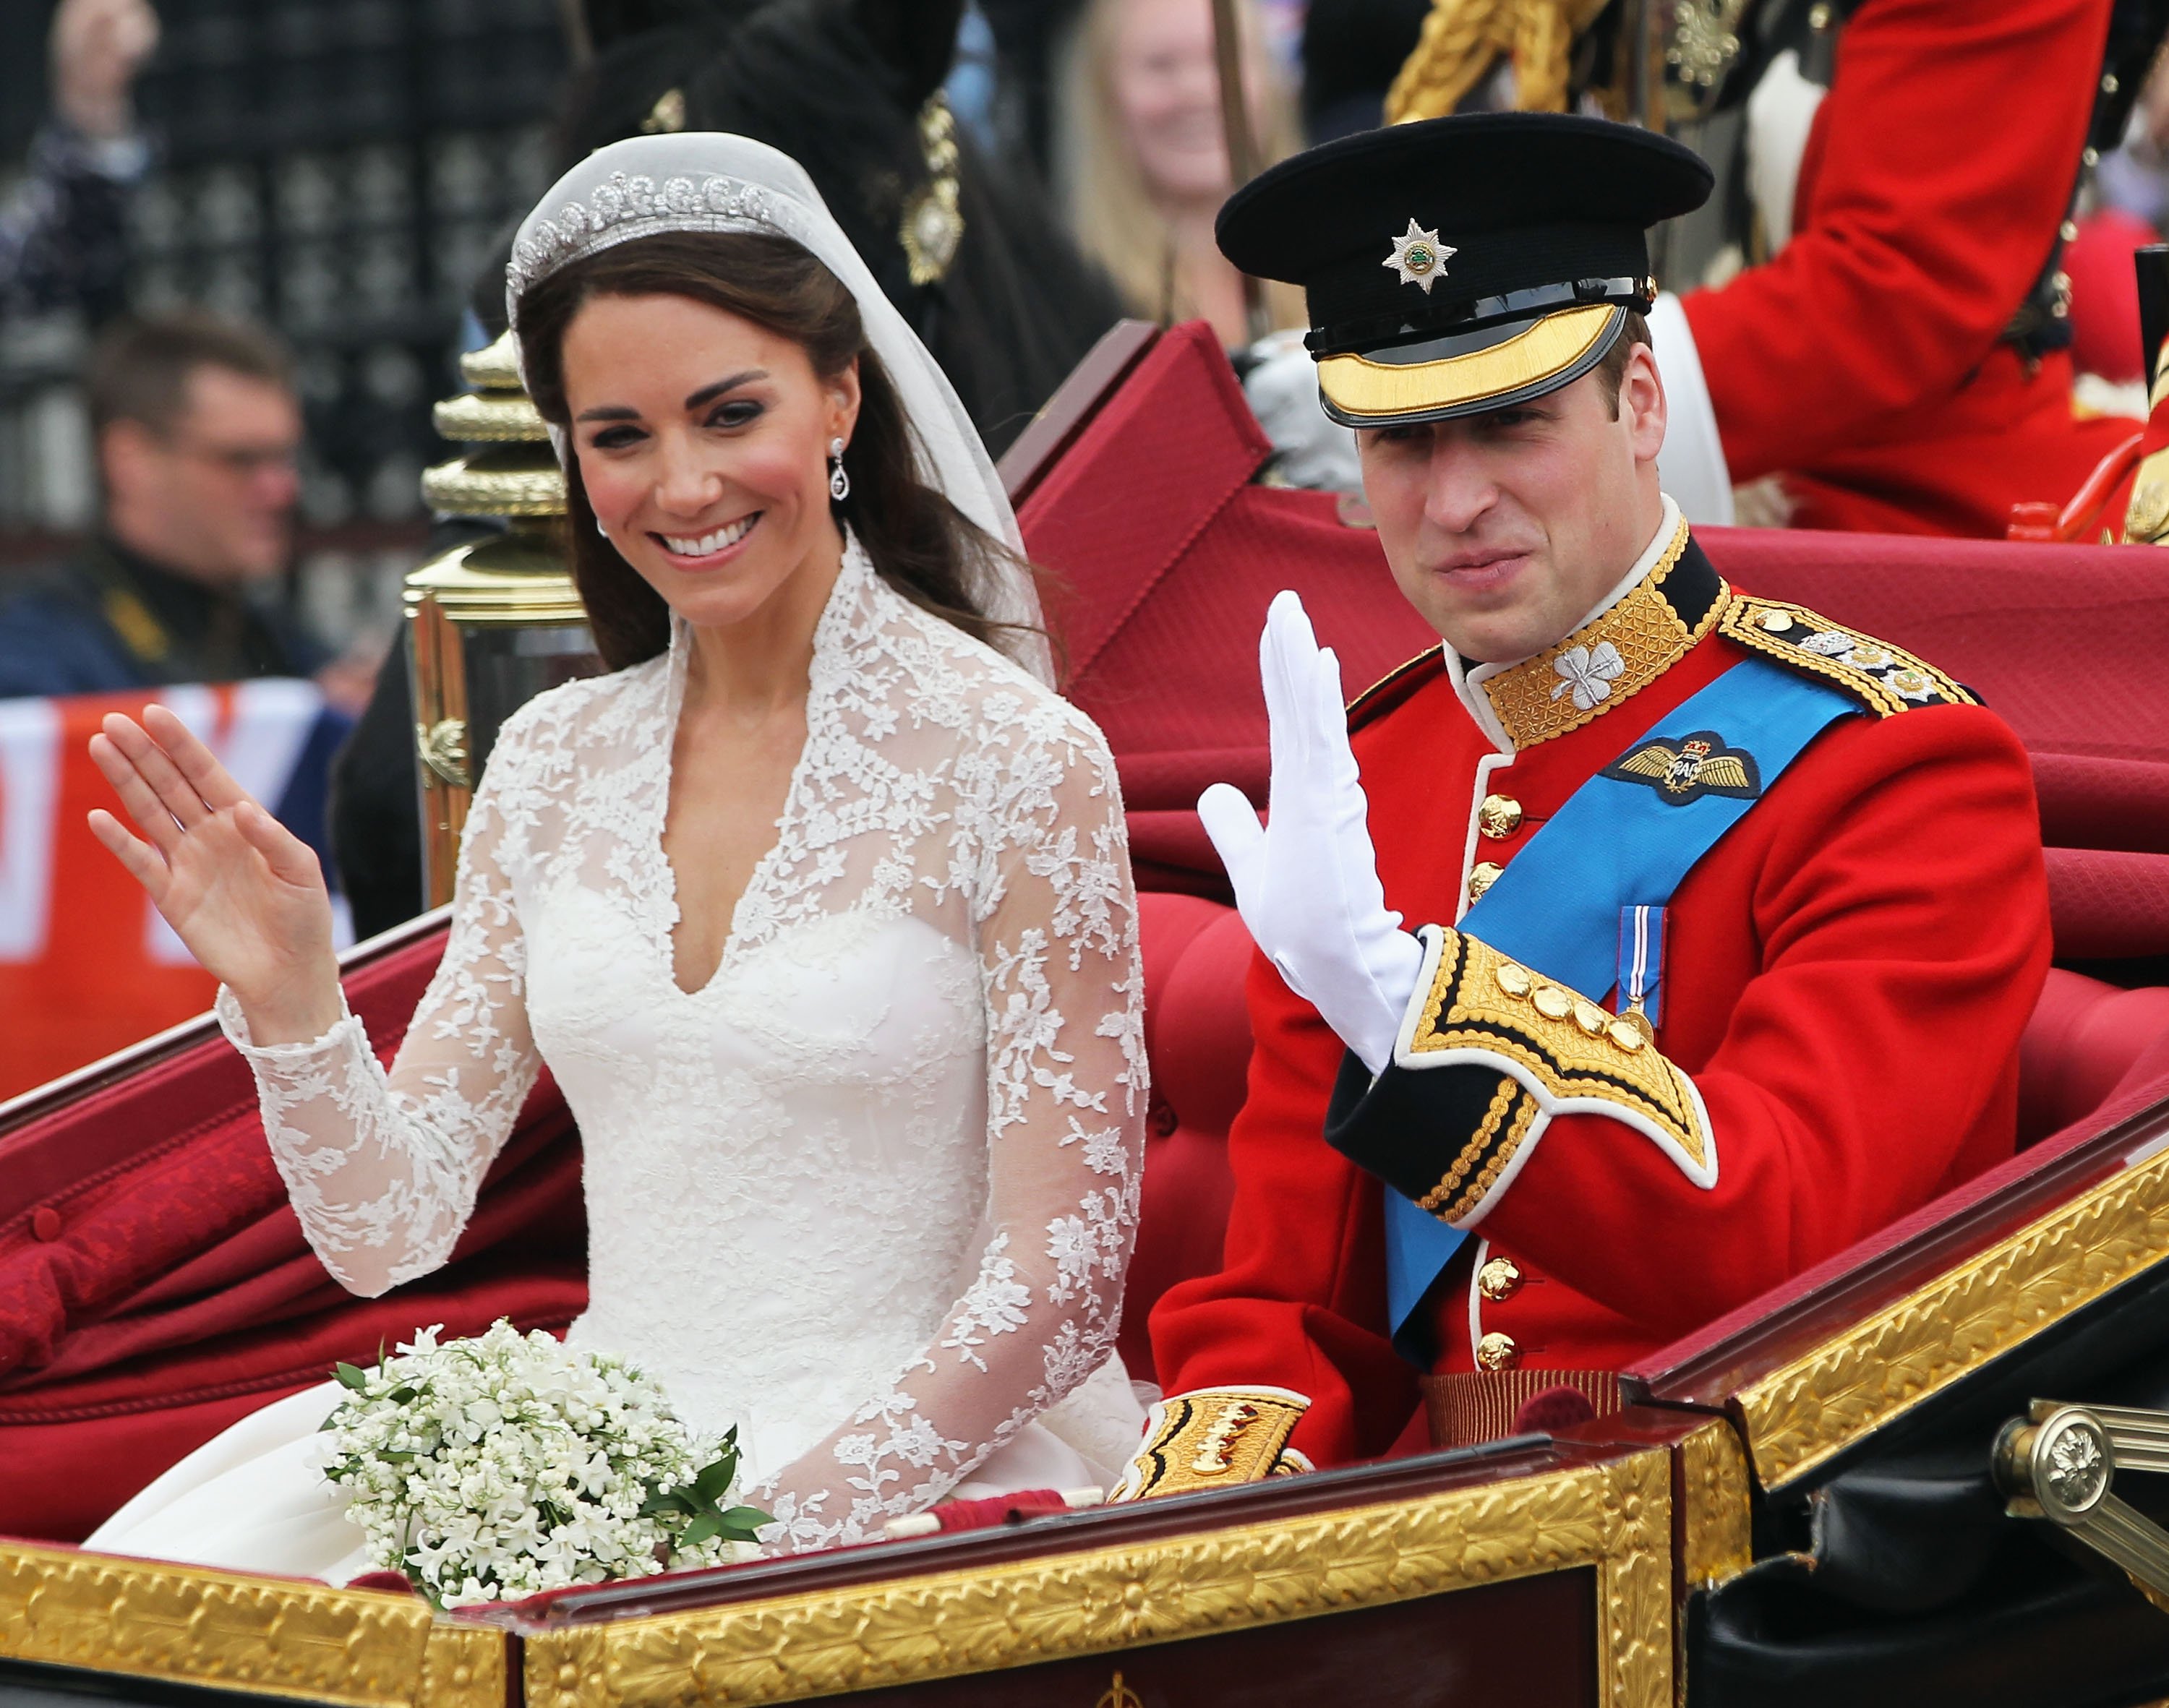 Prince William and Kate Middleton in a carriage procession to Buckingham Palace after their marriage on April 29, 2011 | Source: Getty Images